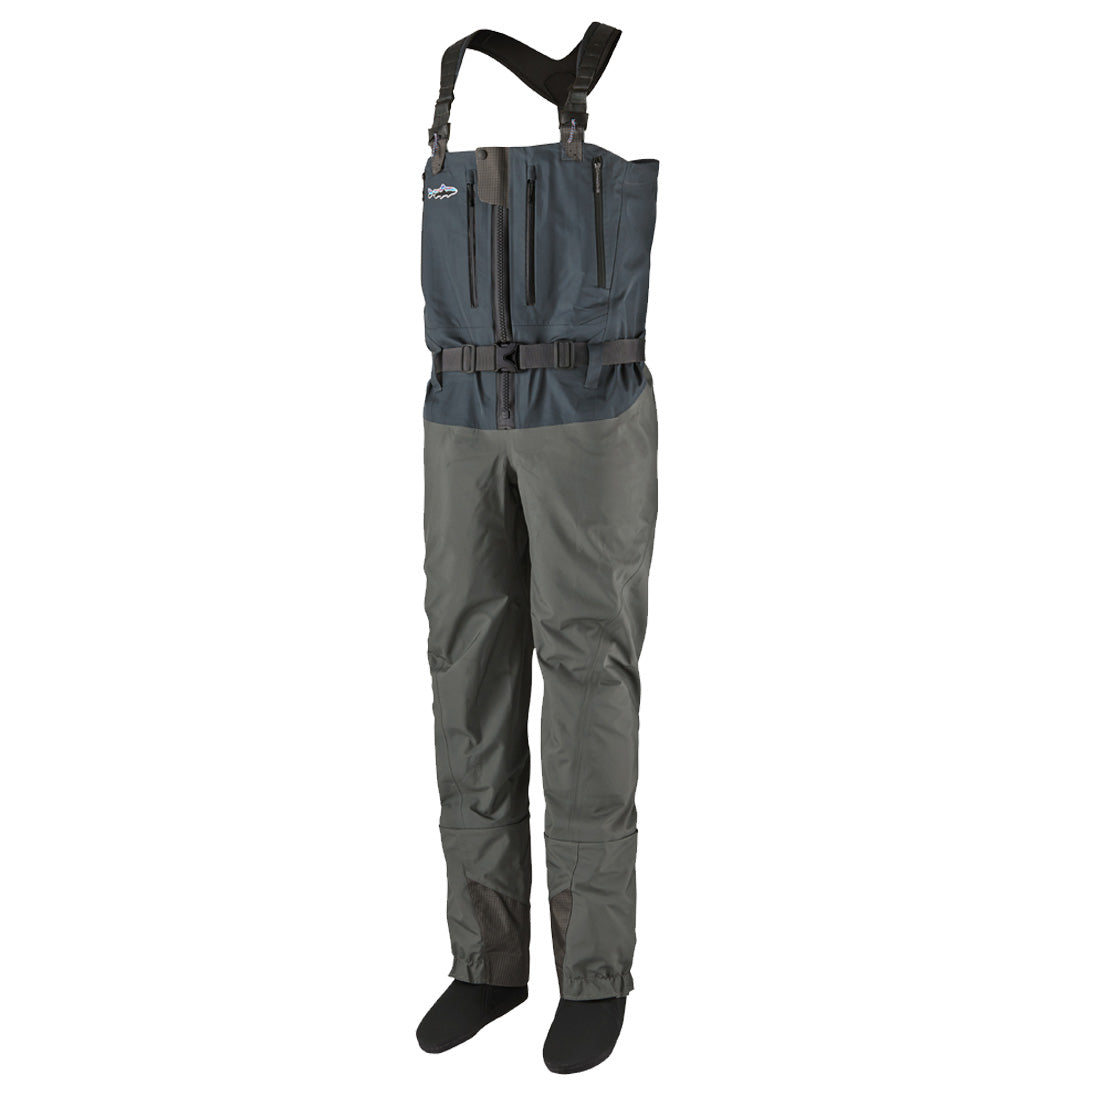 Patagonia Swiftcurrent Expedition Zip-Front Waders - Men's